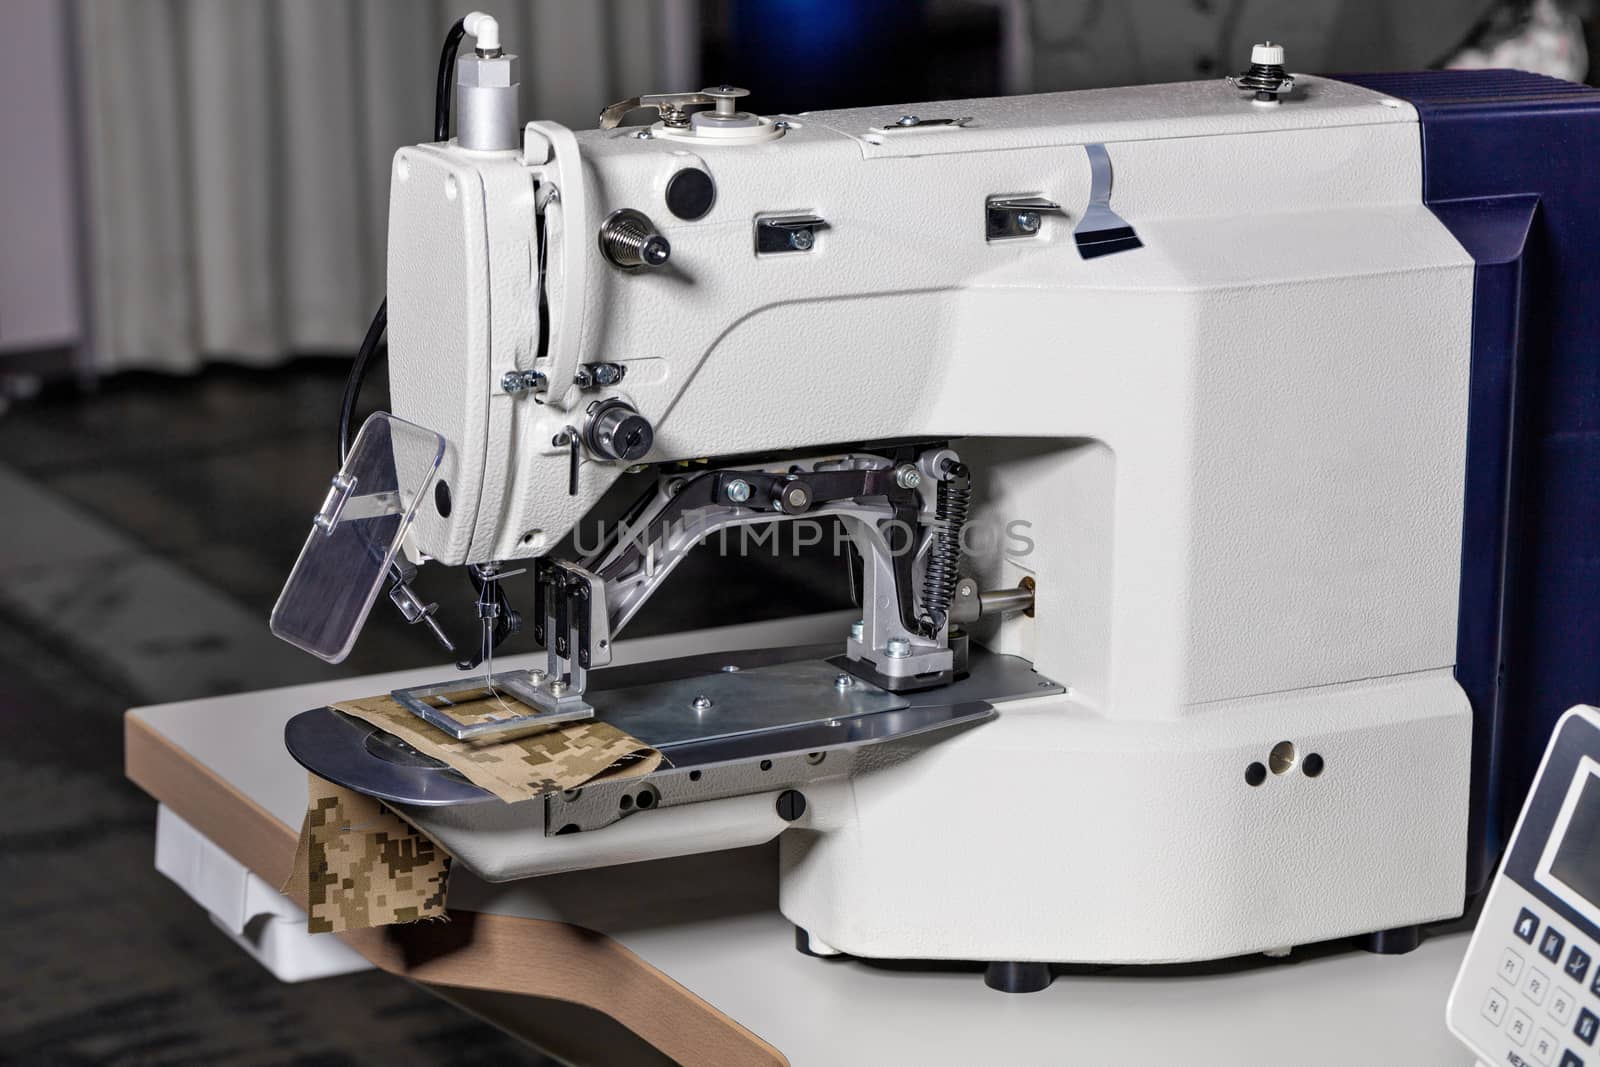 Professional sewing machine, equipment for hemming and sewing clothes, close-up. by Sergii